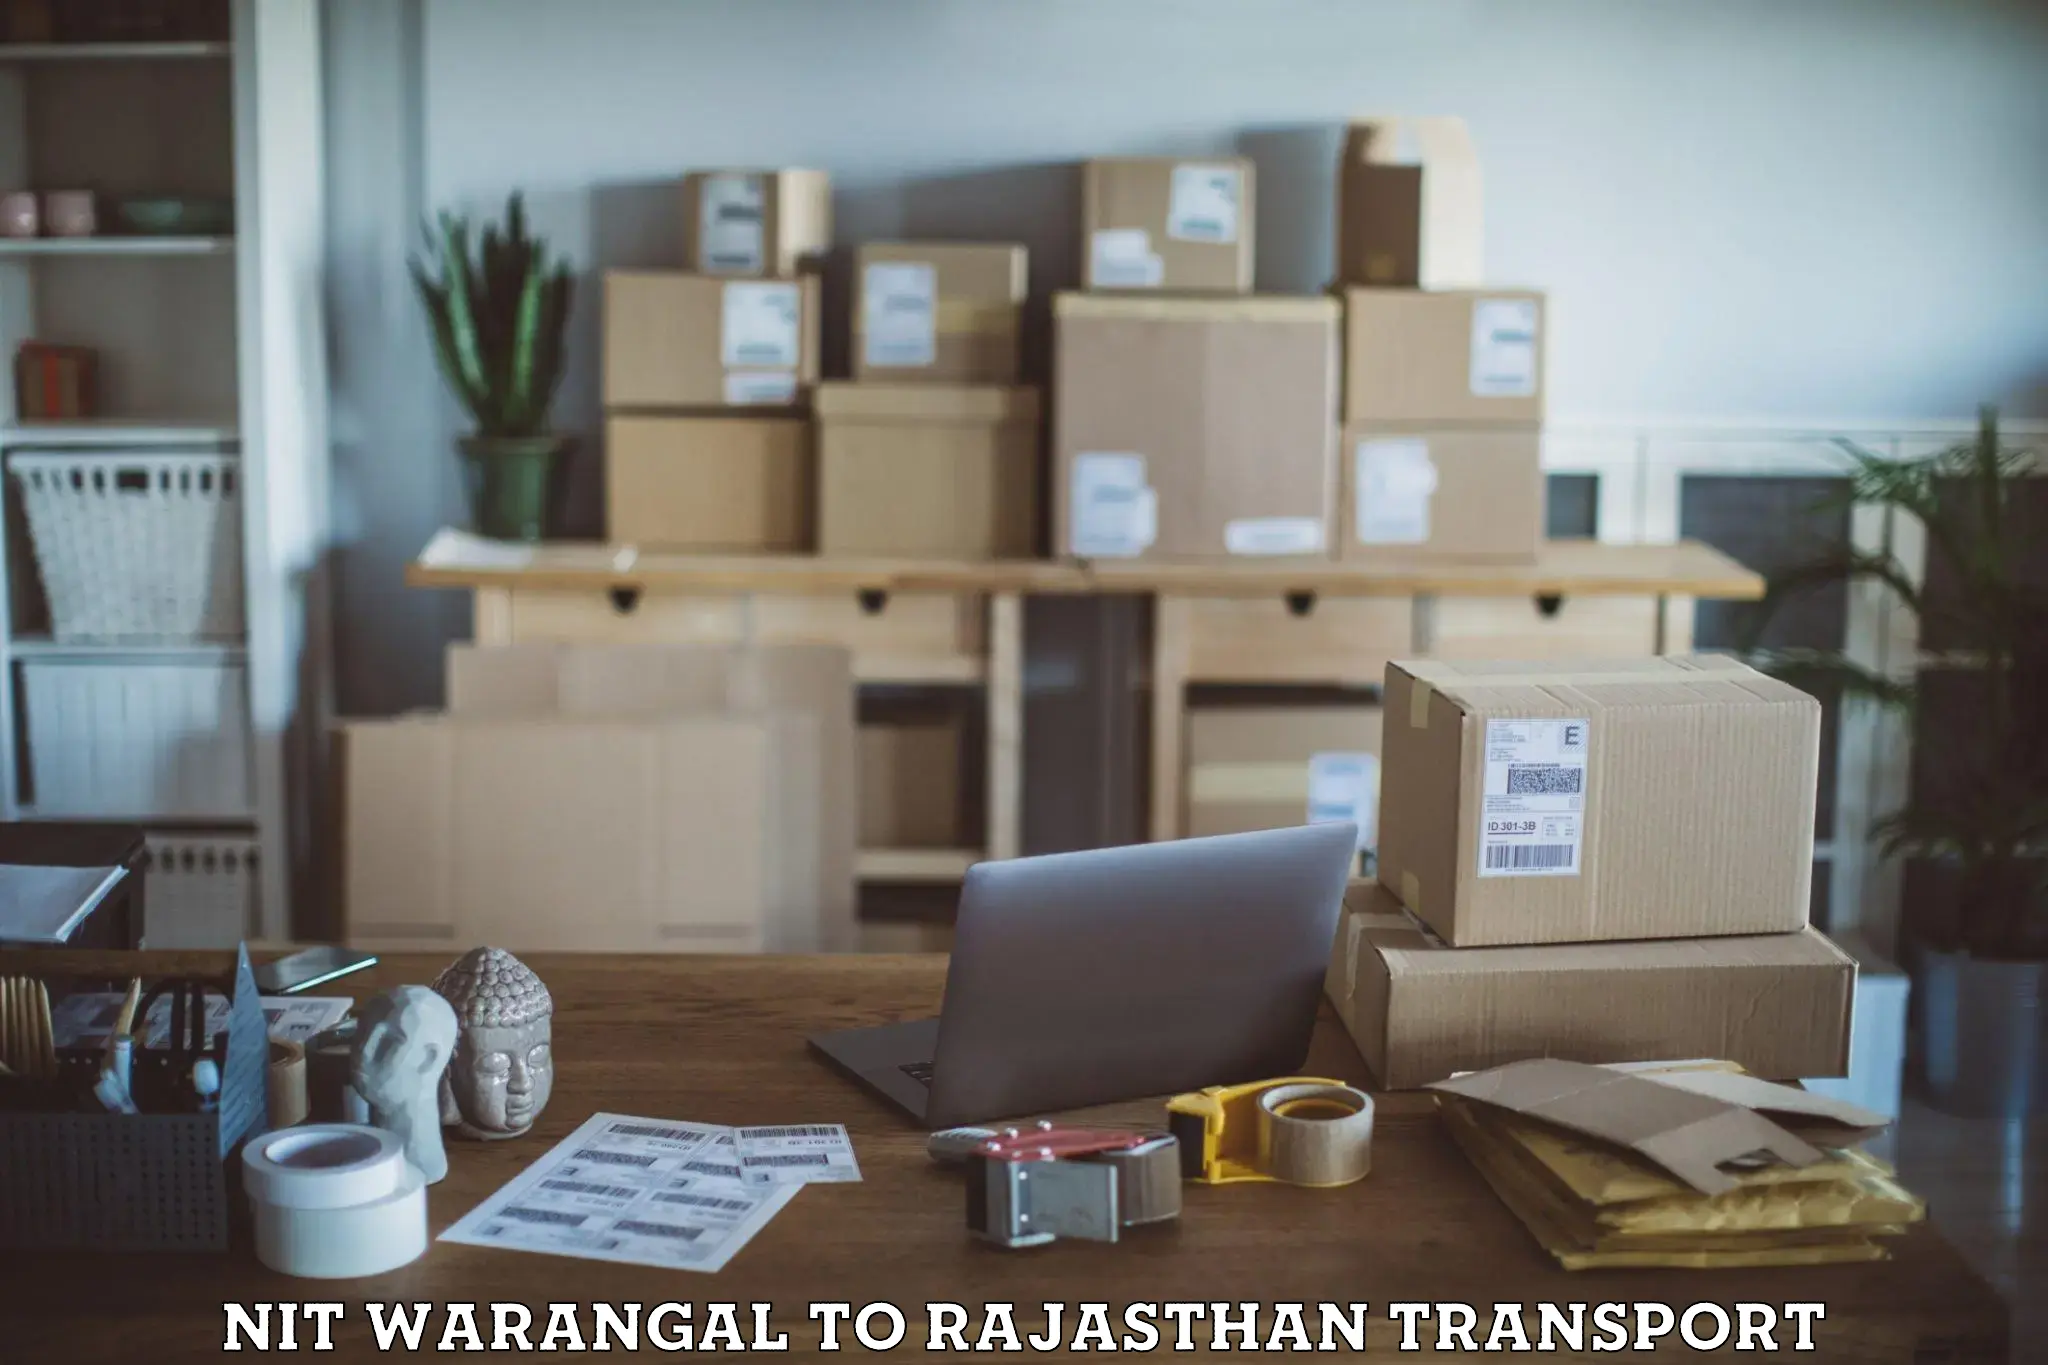 Transport shared services in NIT Warangal to Buhana